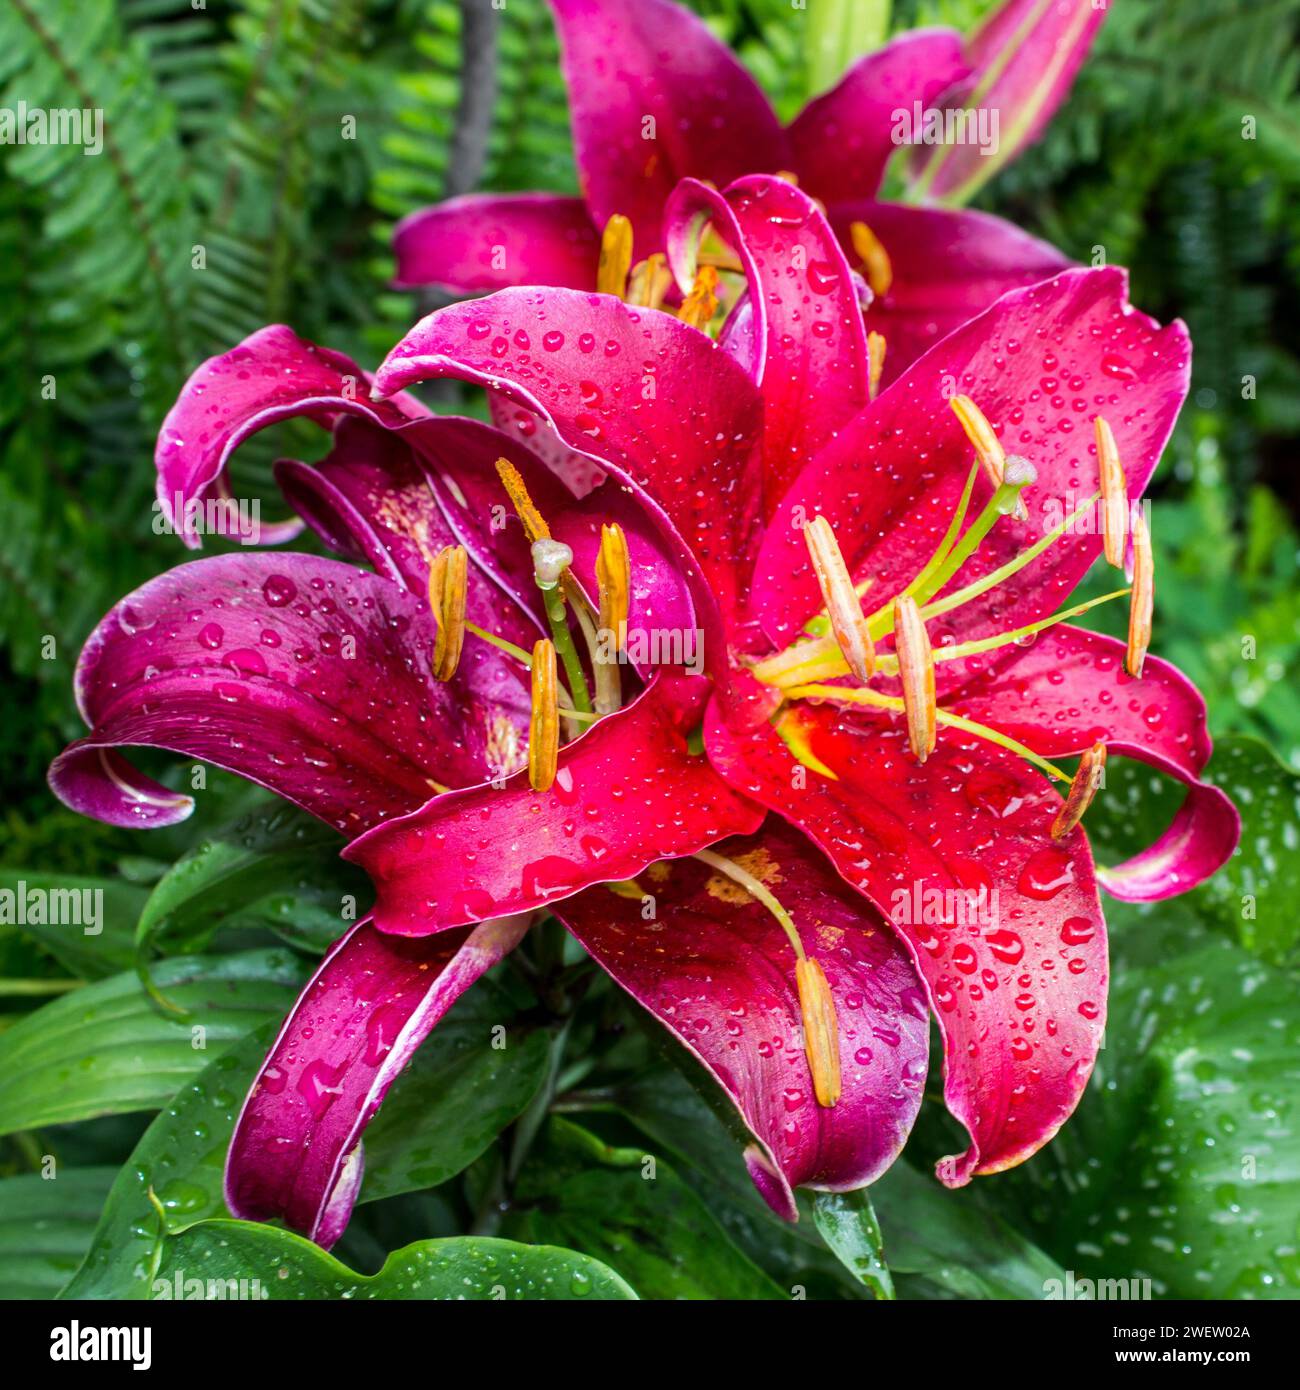 The beautiful large reddish purple coloured flowers of an Oriental lily hybrid, covered in water drops. Stock Photo